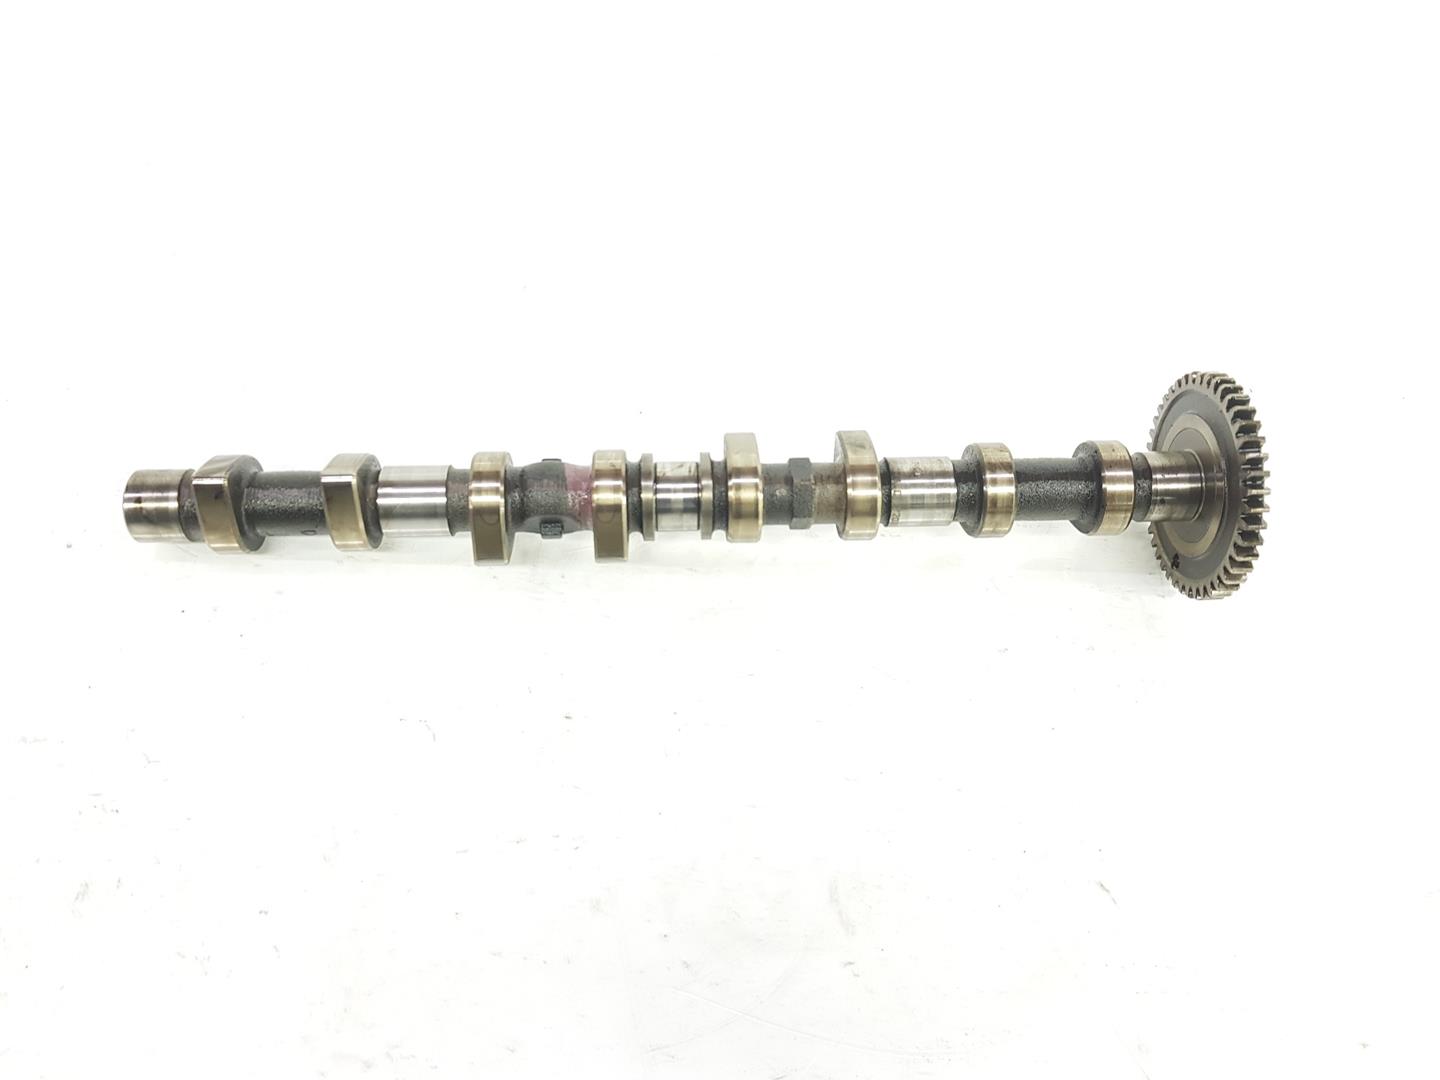 MERCEDES-BENZ C-Class W203/S203/CL203 (2000-2008) Exhaust Camshaft A6110502001, A6110500601, ADMISION 19775565